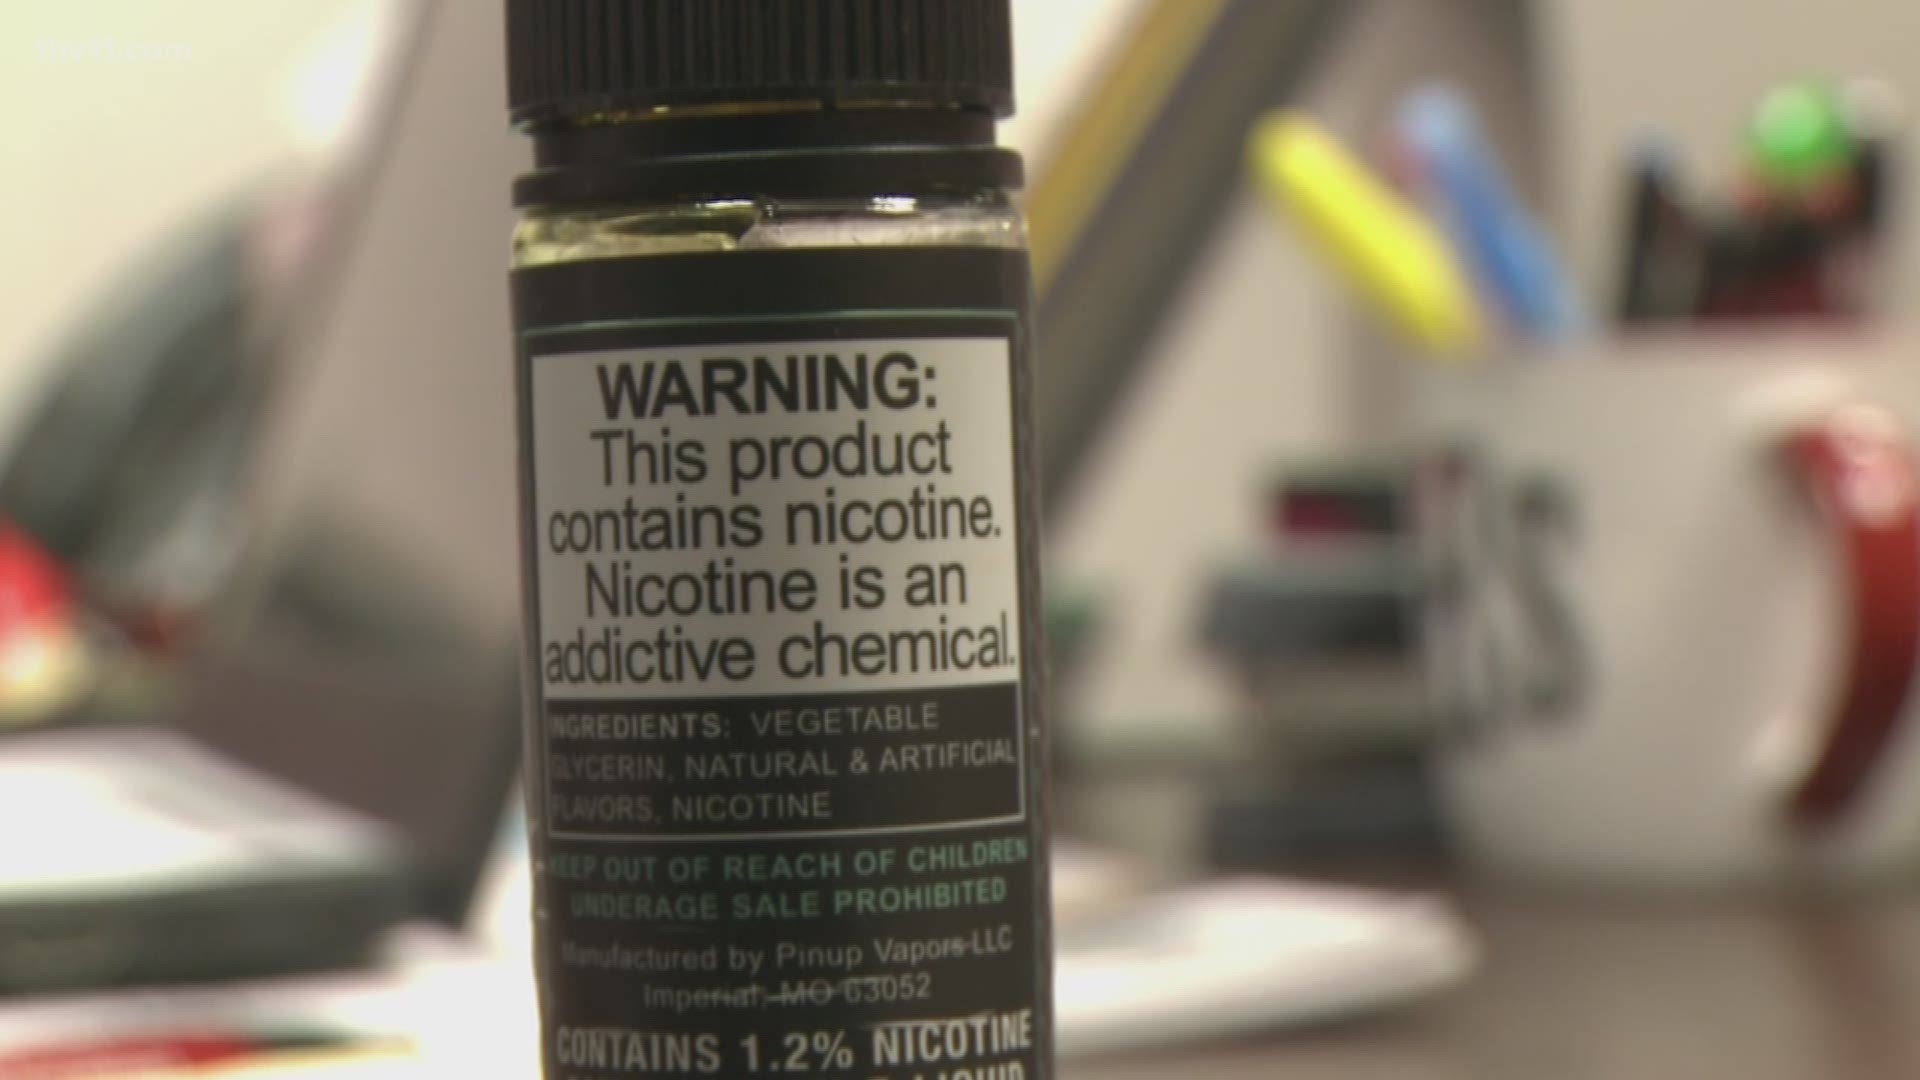 The prevalence of young people vaping is concerning. In Russellville, the school district decided to crack down on teen e-cig use, sending a letter to parents and teaching students about the new policy.